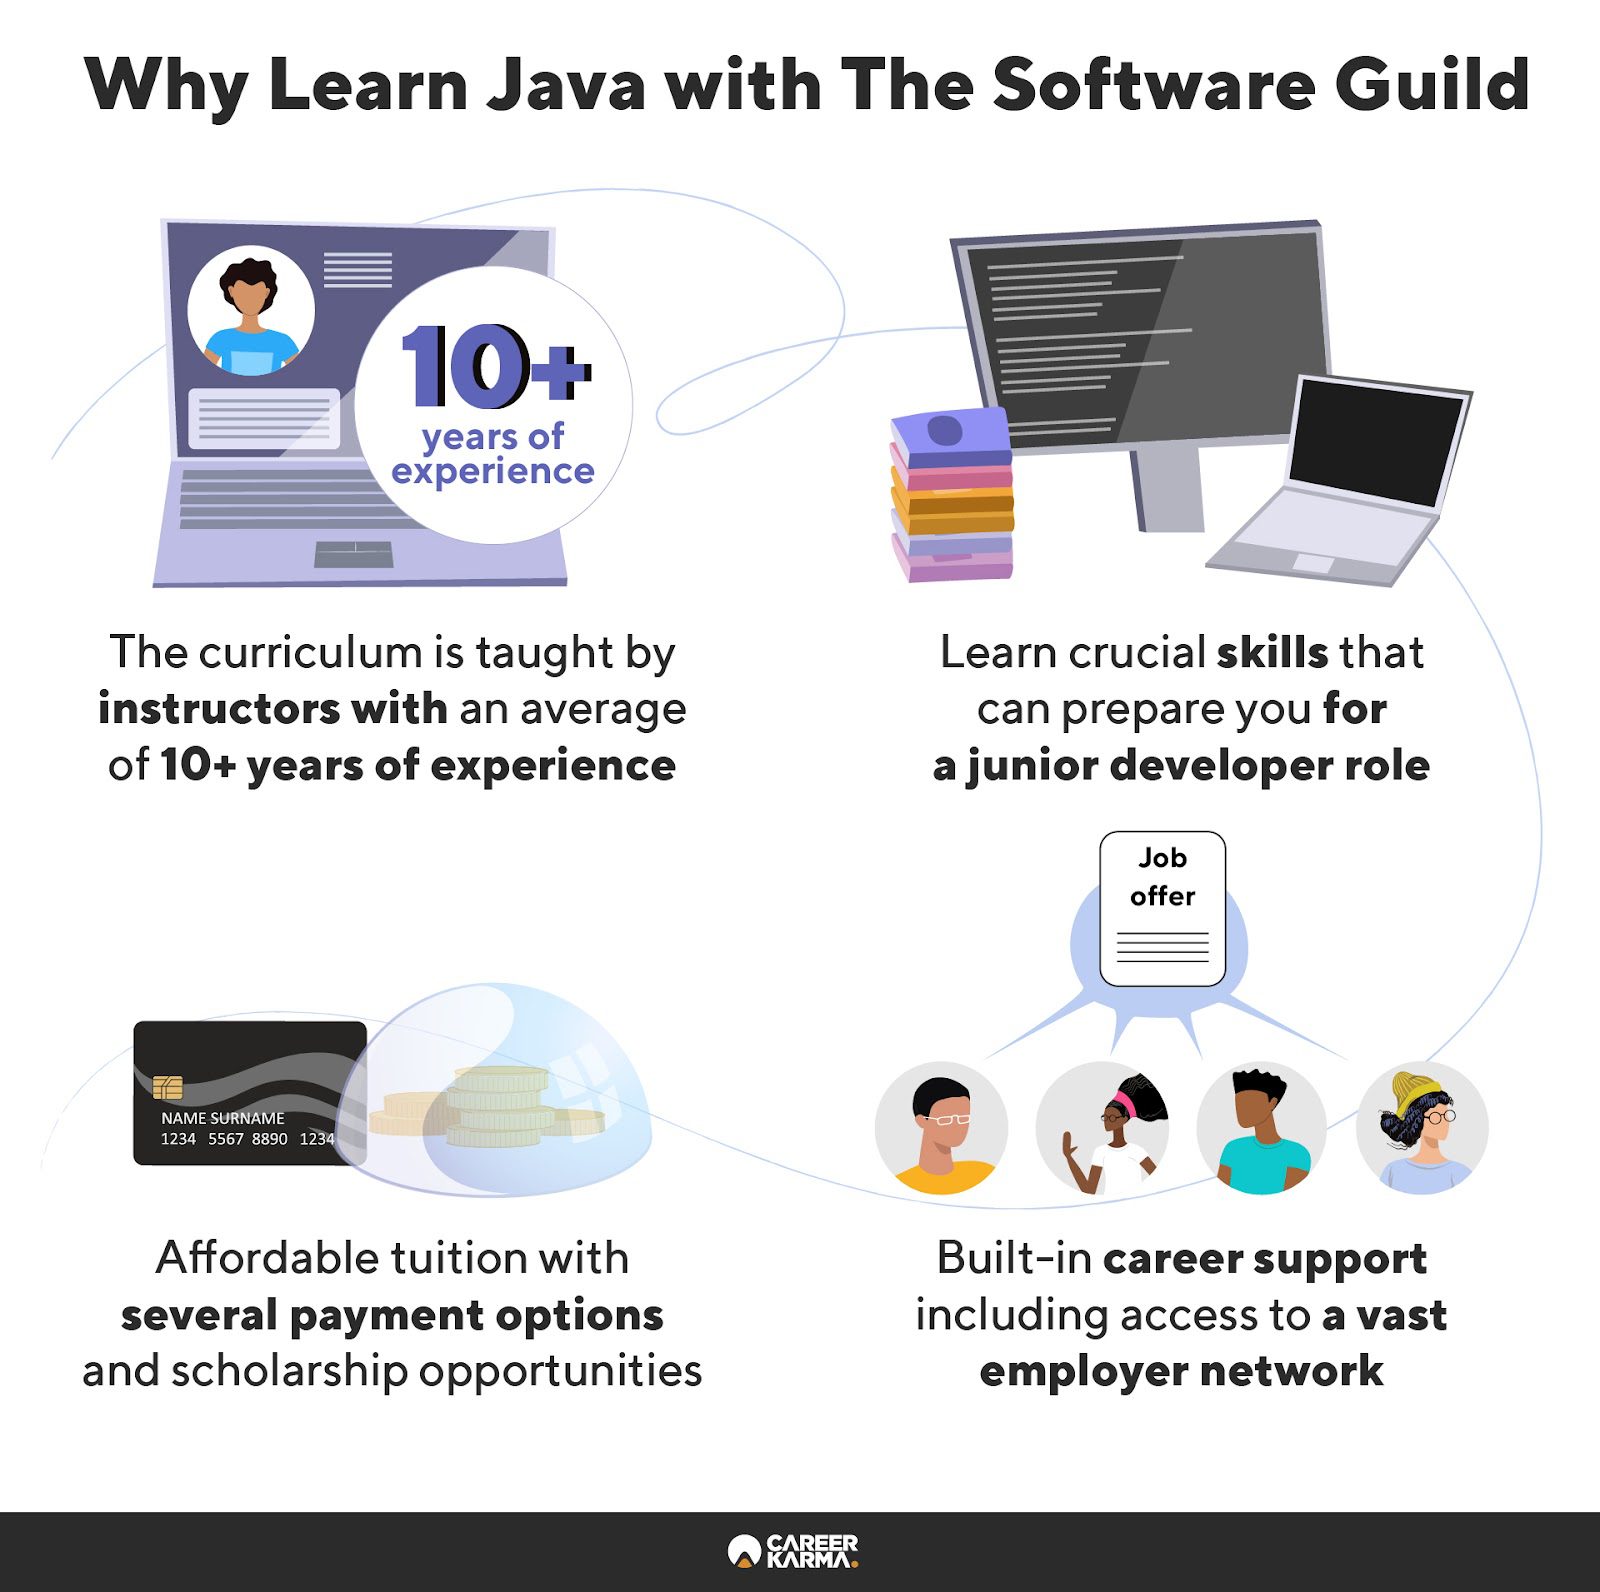 An infographic showing the benefits of enrolling in The Software Guild’s Java Bootcamp